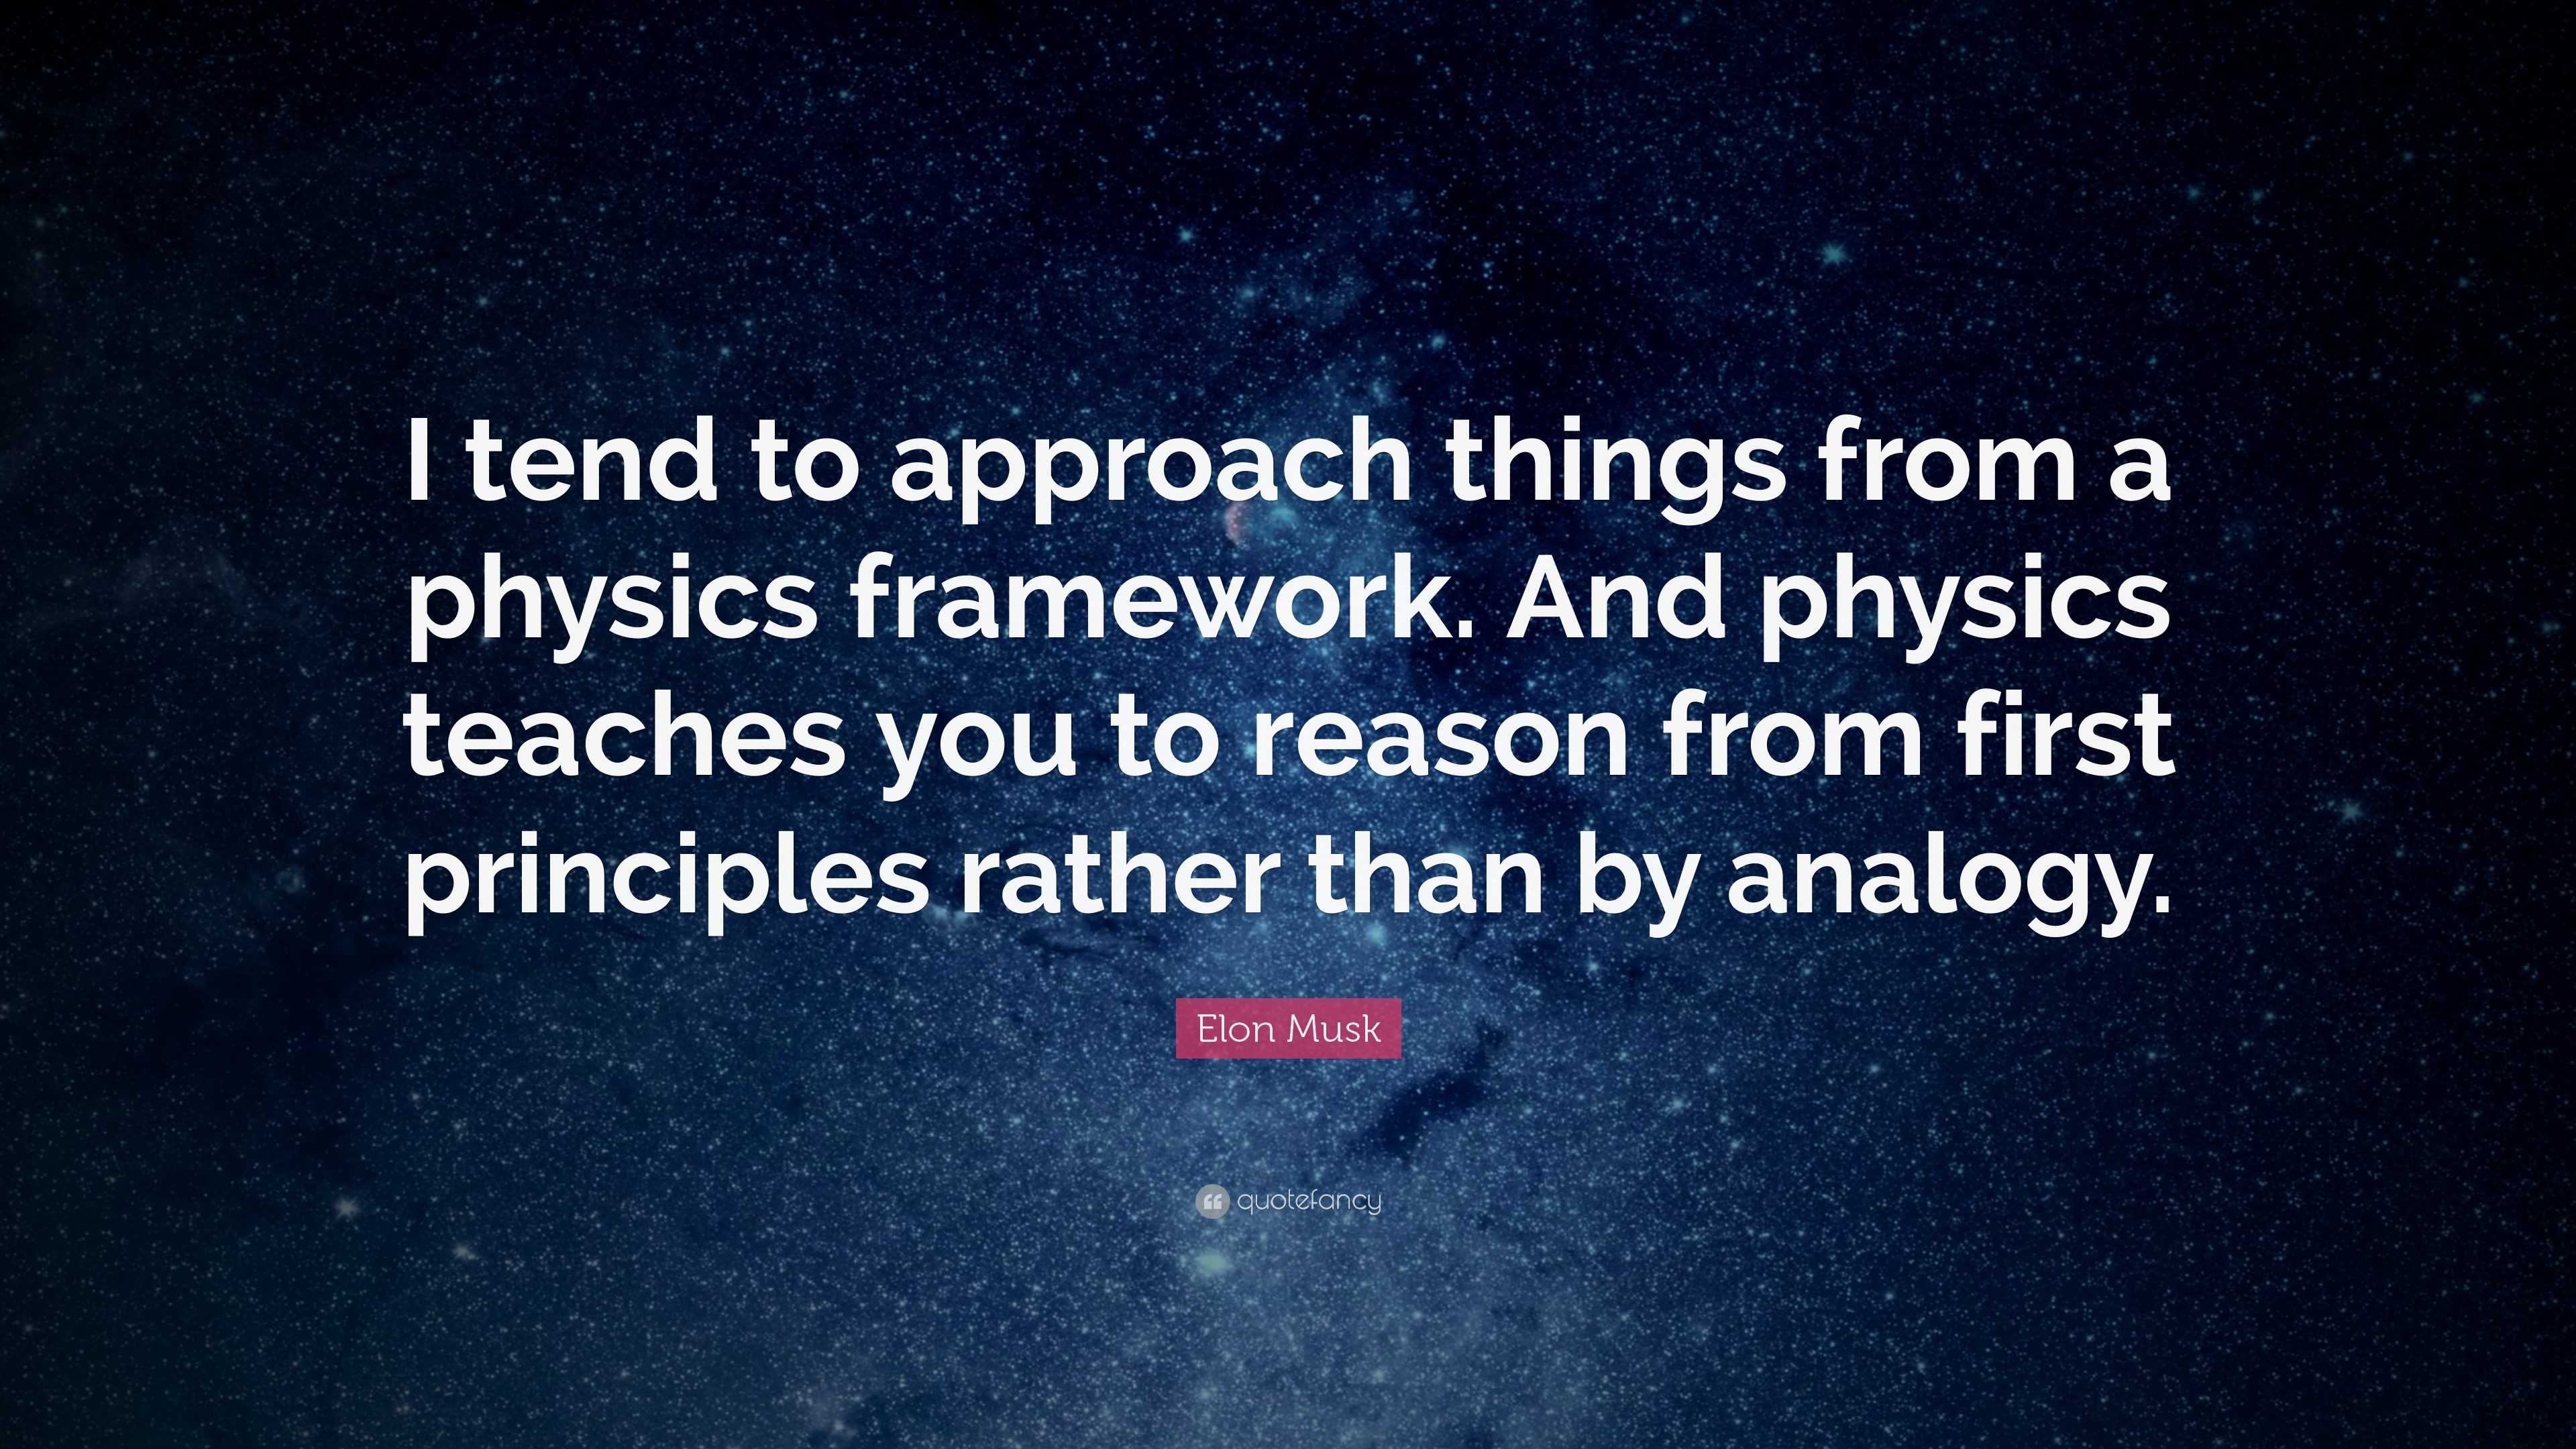 Elon Musk Quote I tend to approach things from a physics framework. And